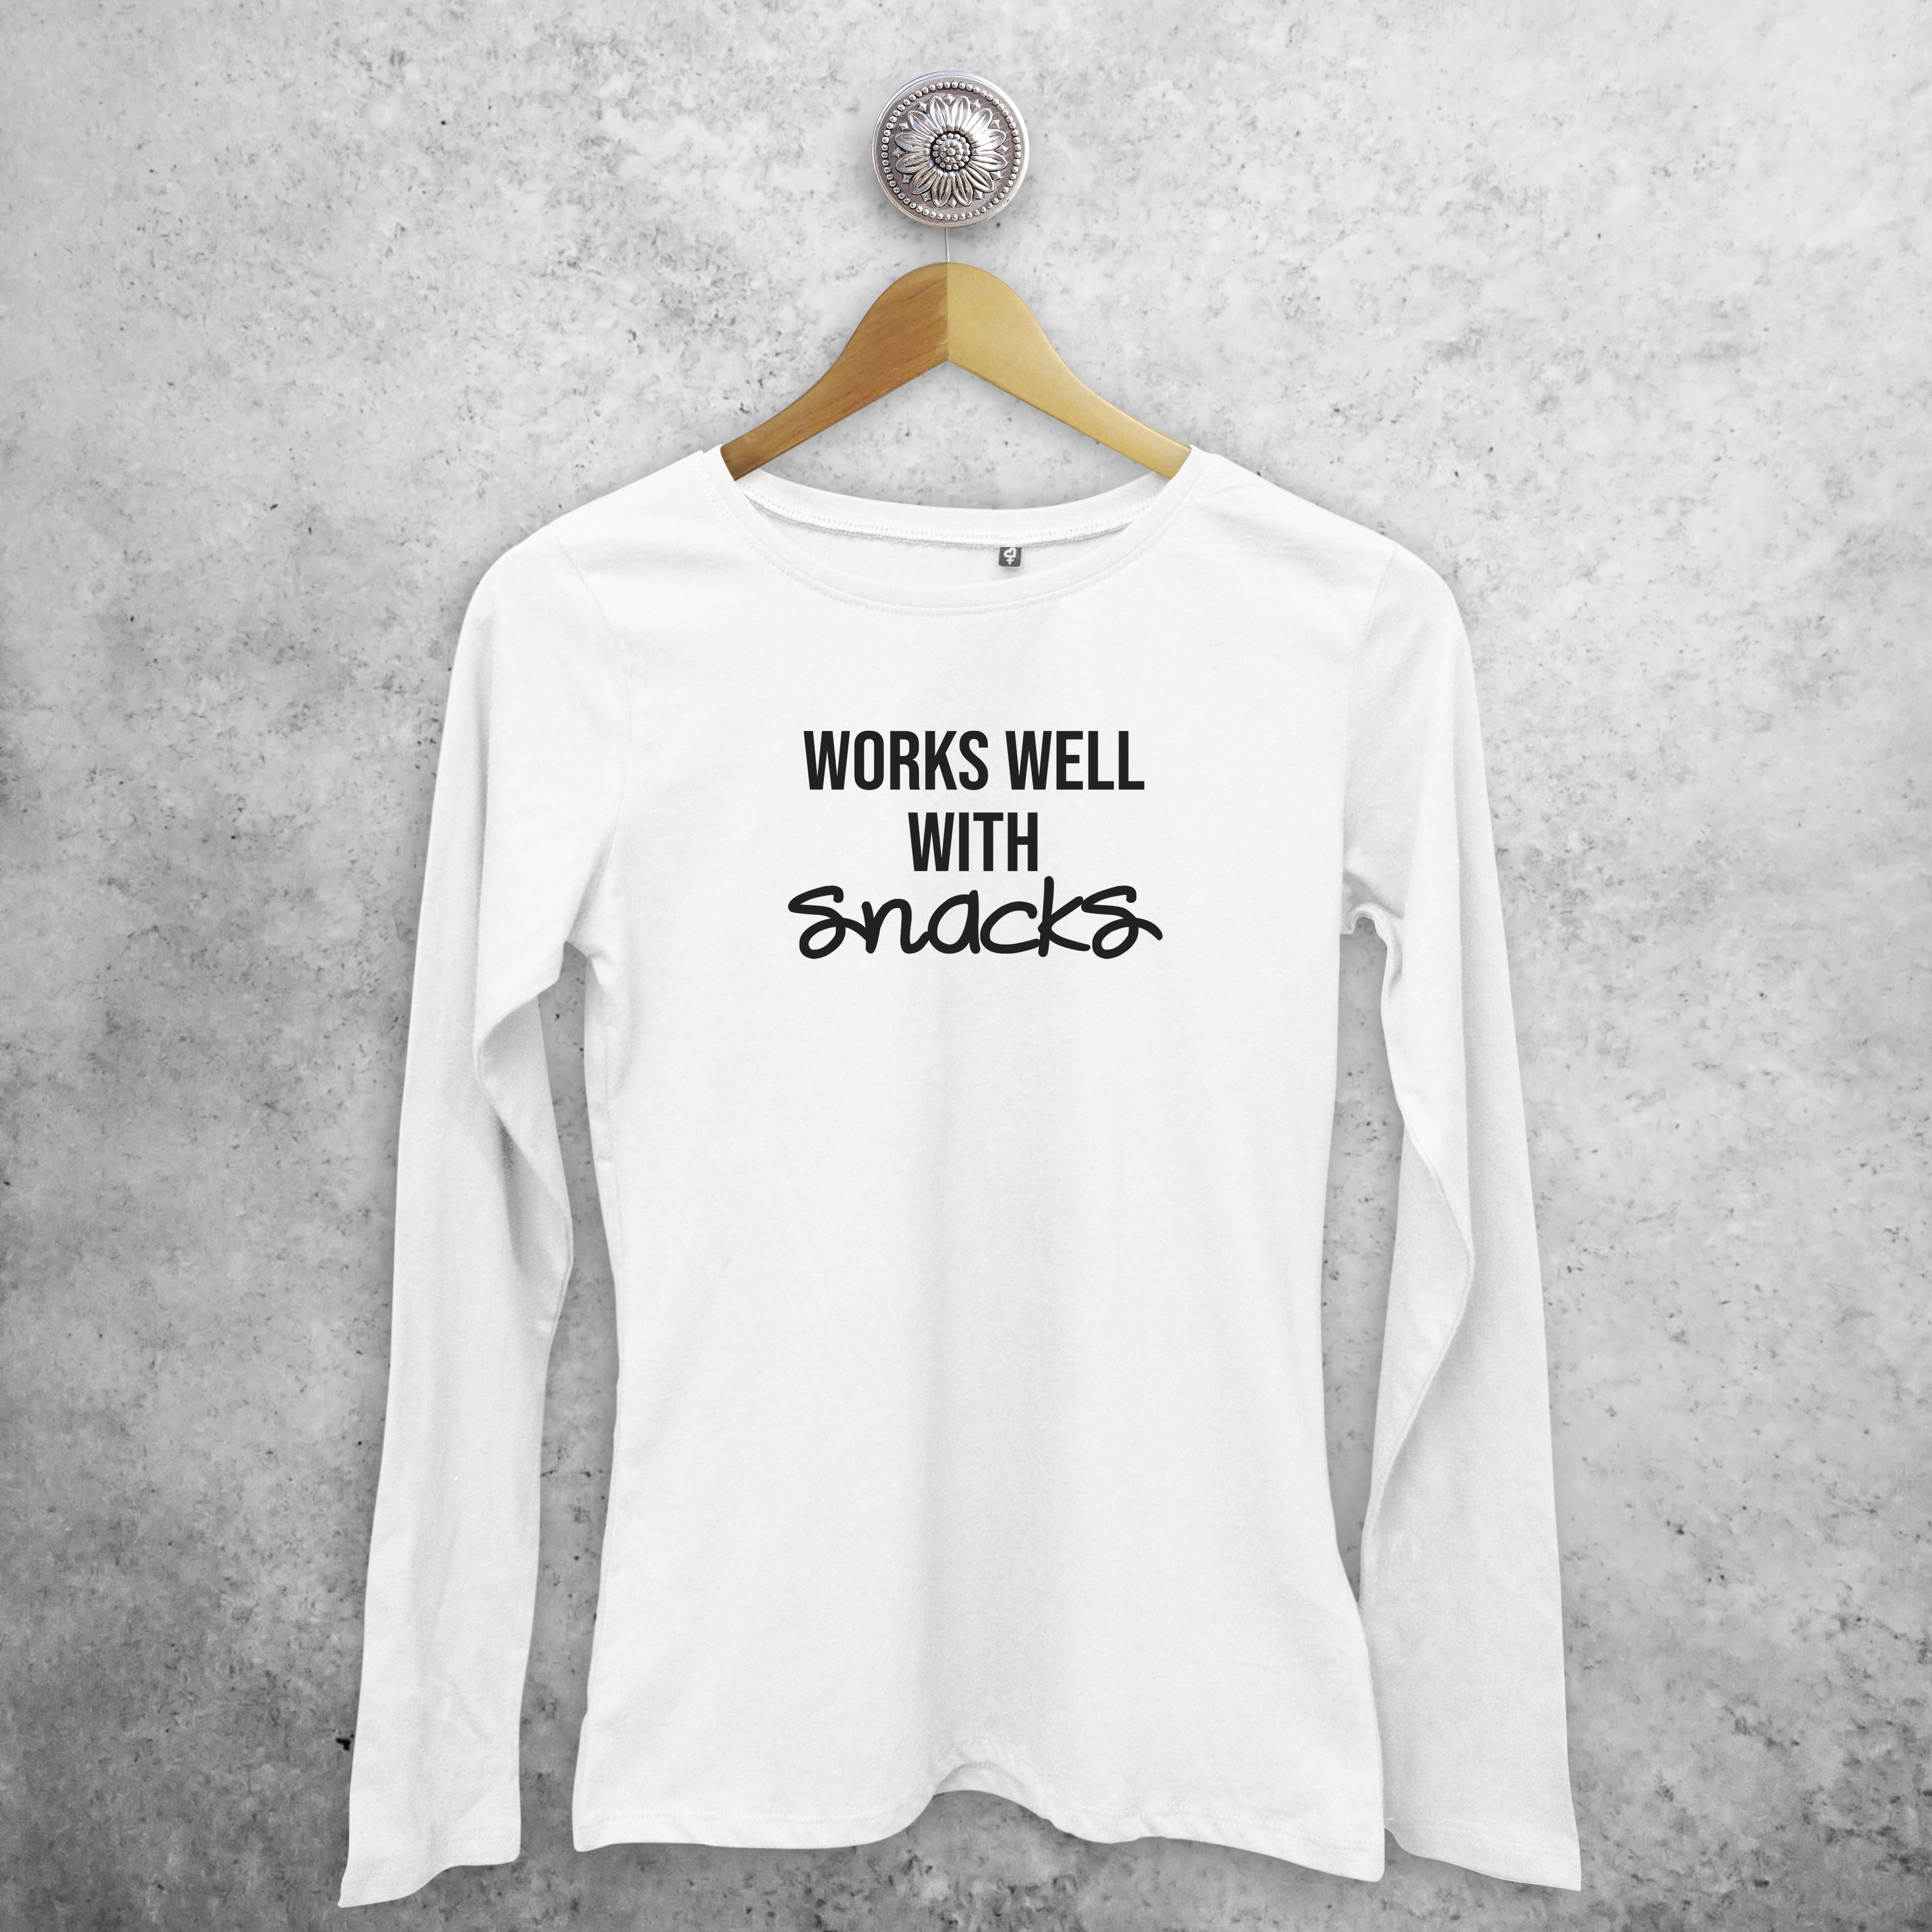 'Works well with snacks' adult longsleeve shirt